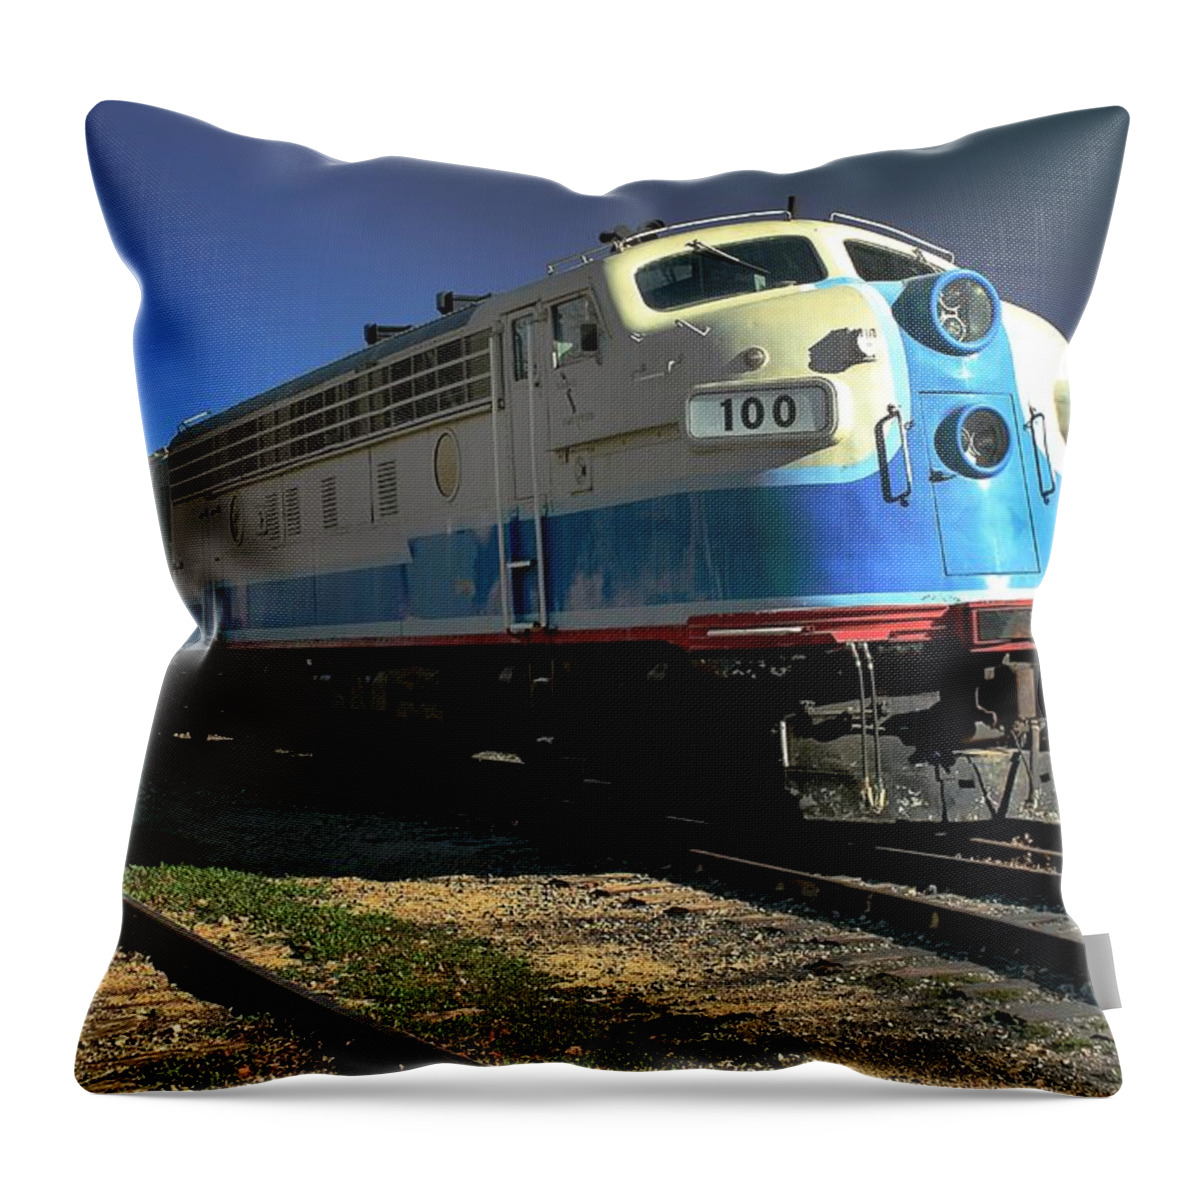 Fillmore Throw Pillow featuring the photograph Fillmore 100 by Michael Gordon